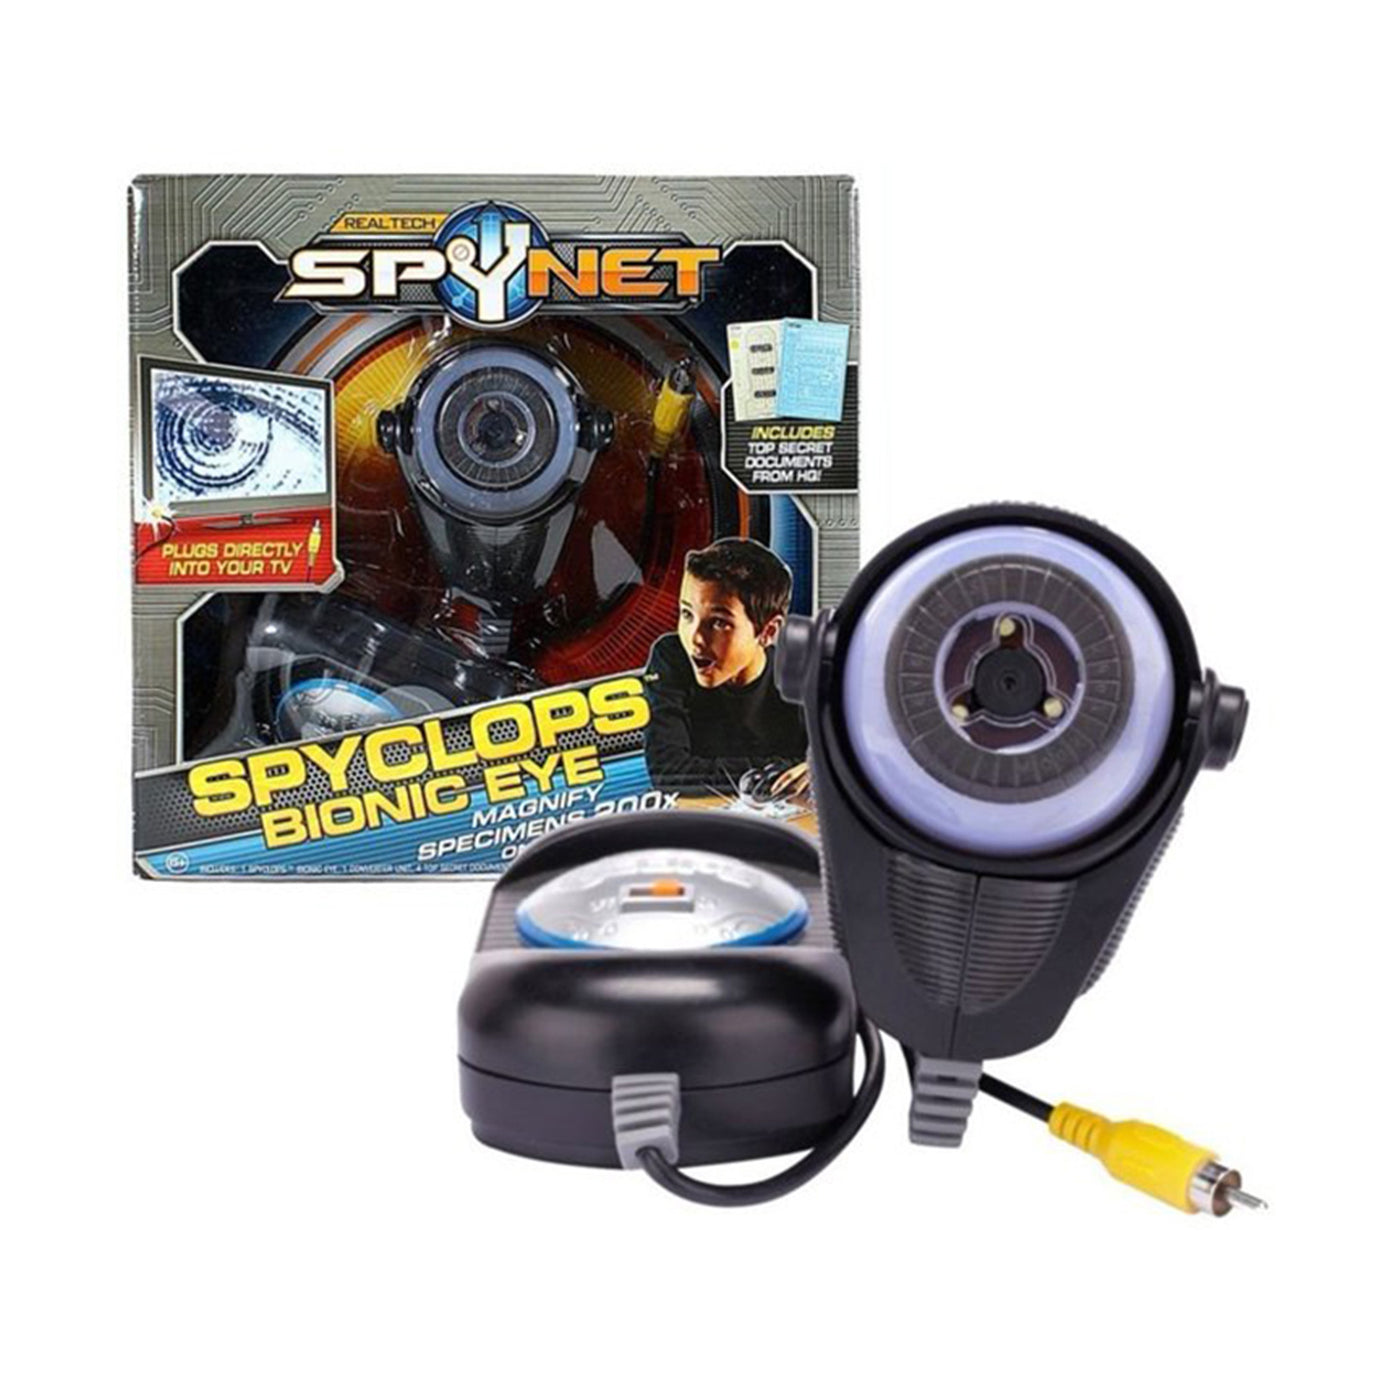 SpyNet Real Tech® Series Spyclops Bionic Eye with 200X Specimen Magnification on Your TV Plus 4 Top Secret Documents